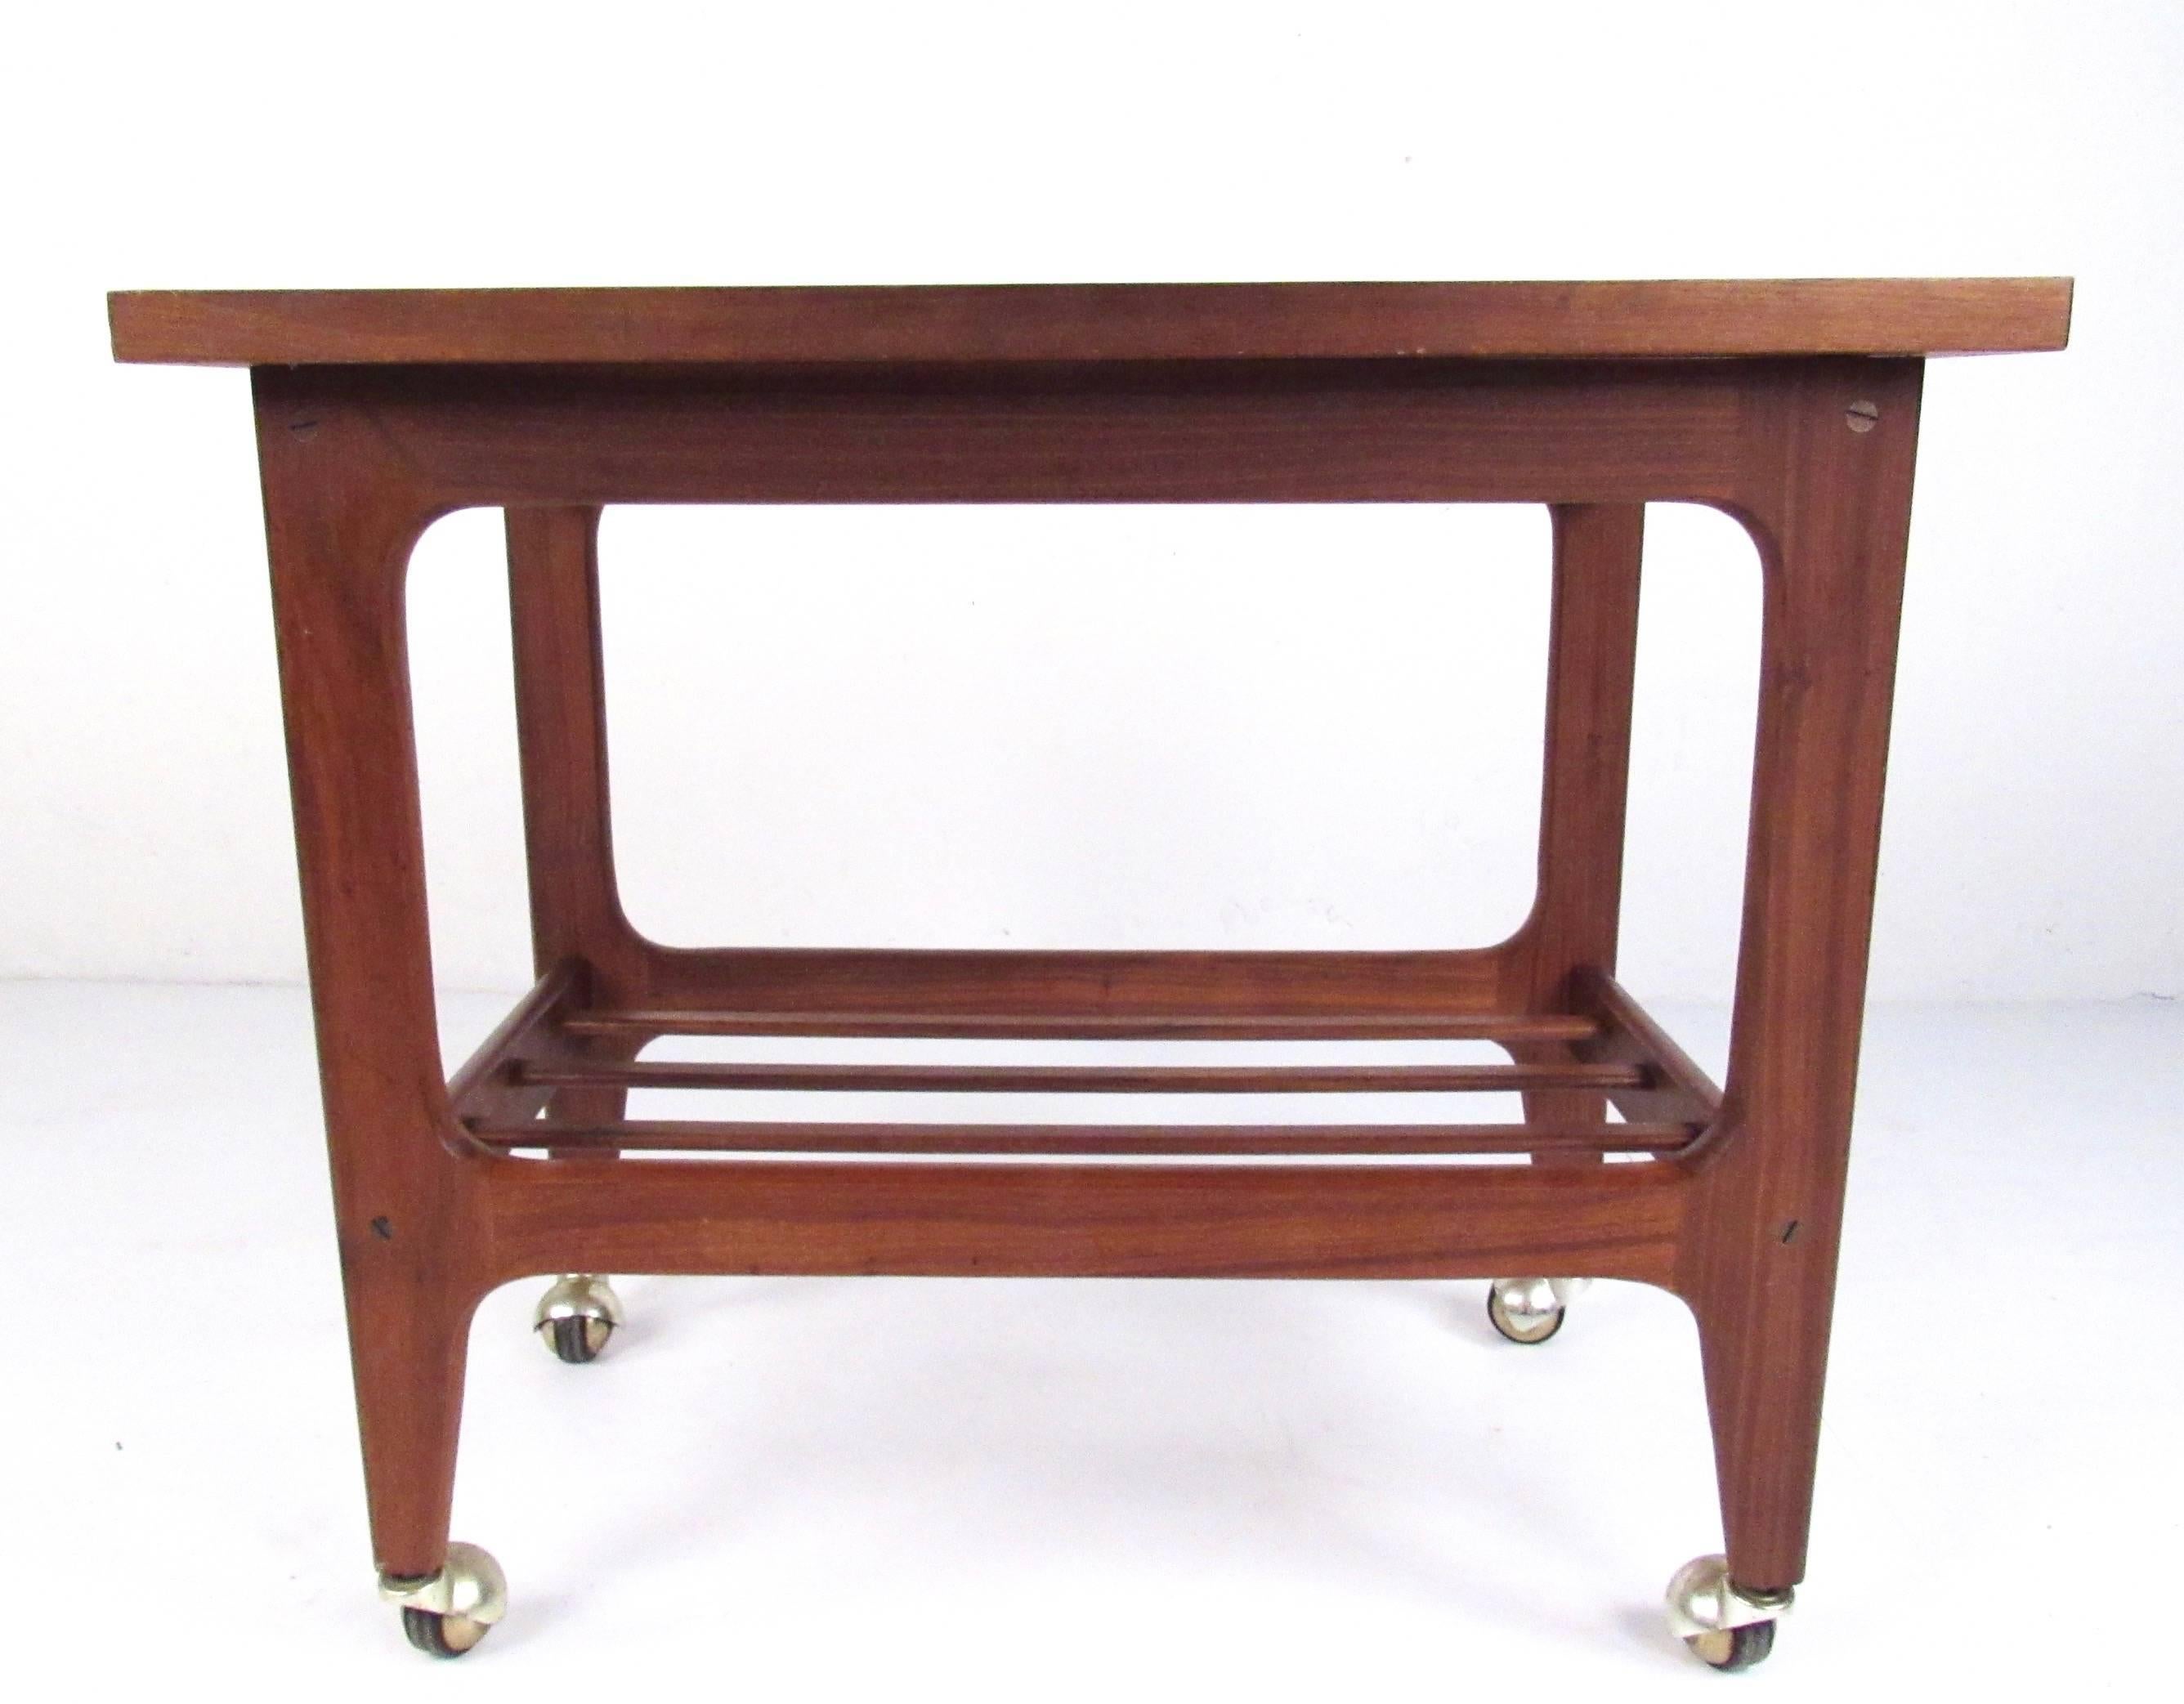 This vintage modern teak bar cart adds a splash of mid-century modern flare to any home dining or seating area. Two-tier construction and sturdy casters make this perfect for bar service or as a versatile Scandinavian Modern side table. Please